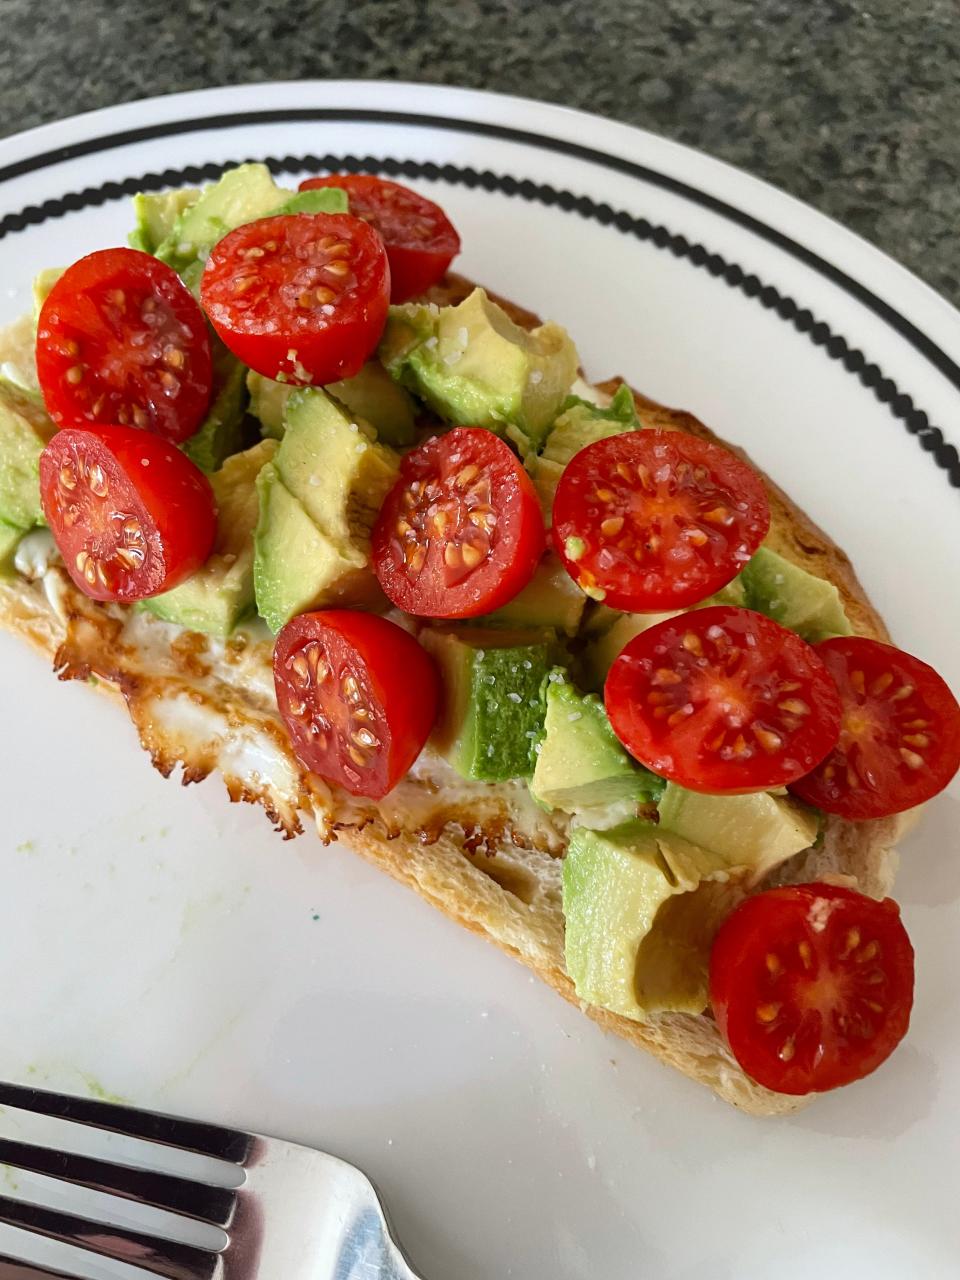 Avocado toast is an easy and healthy meal to make.